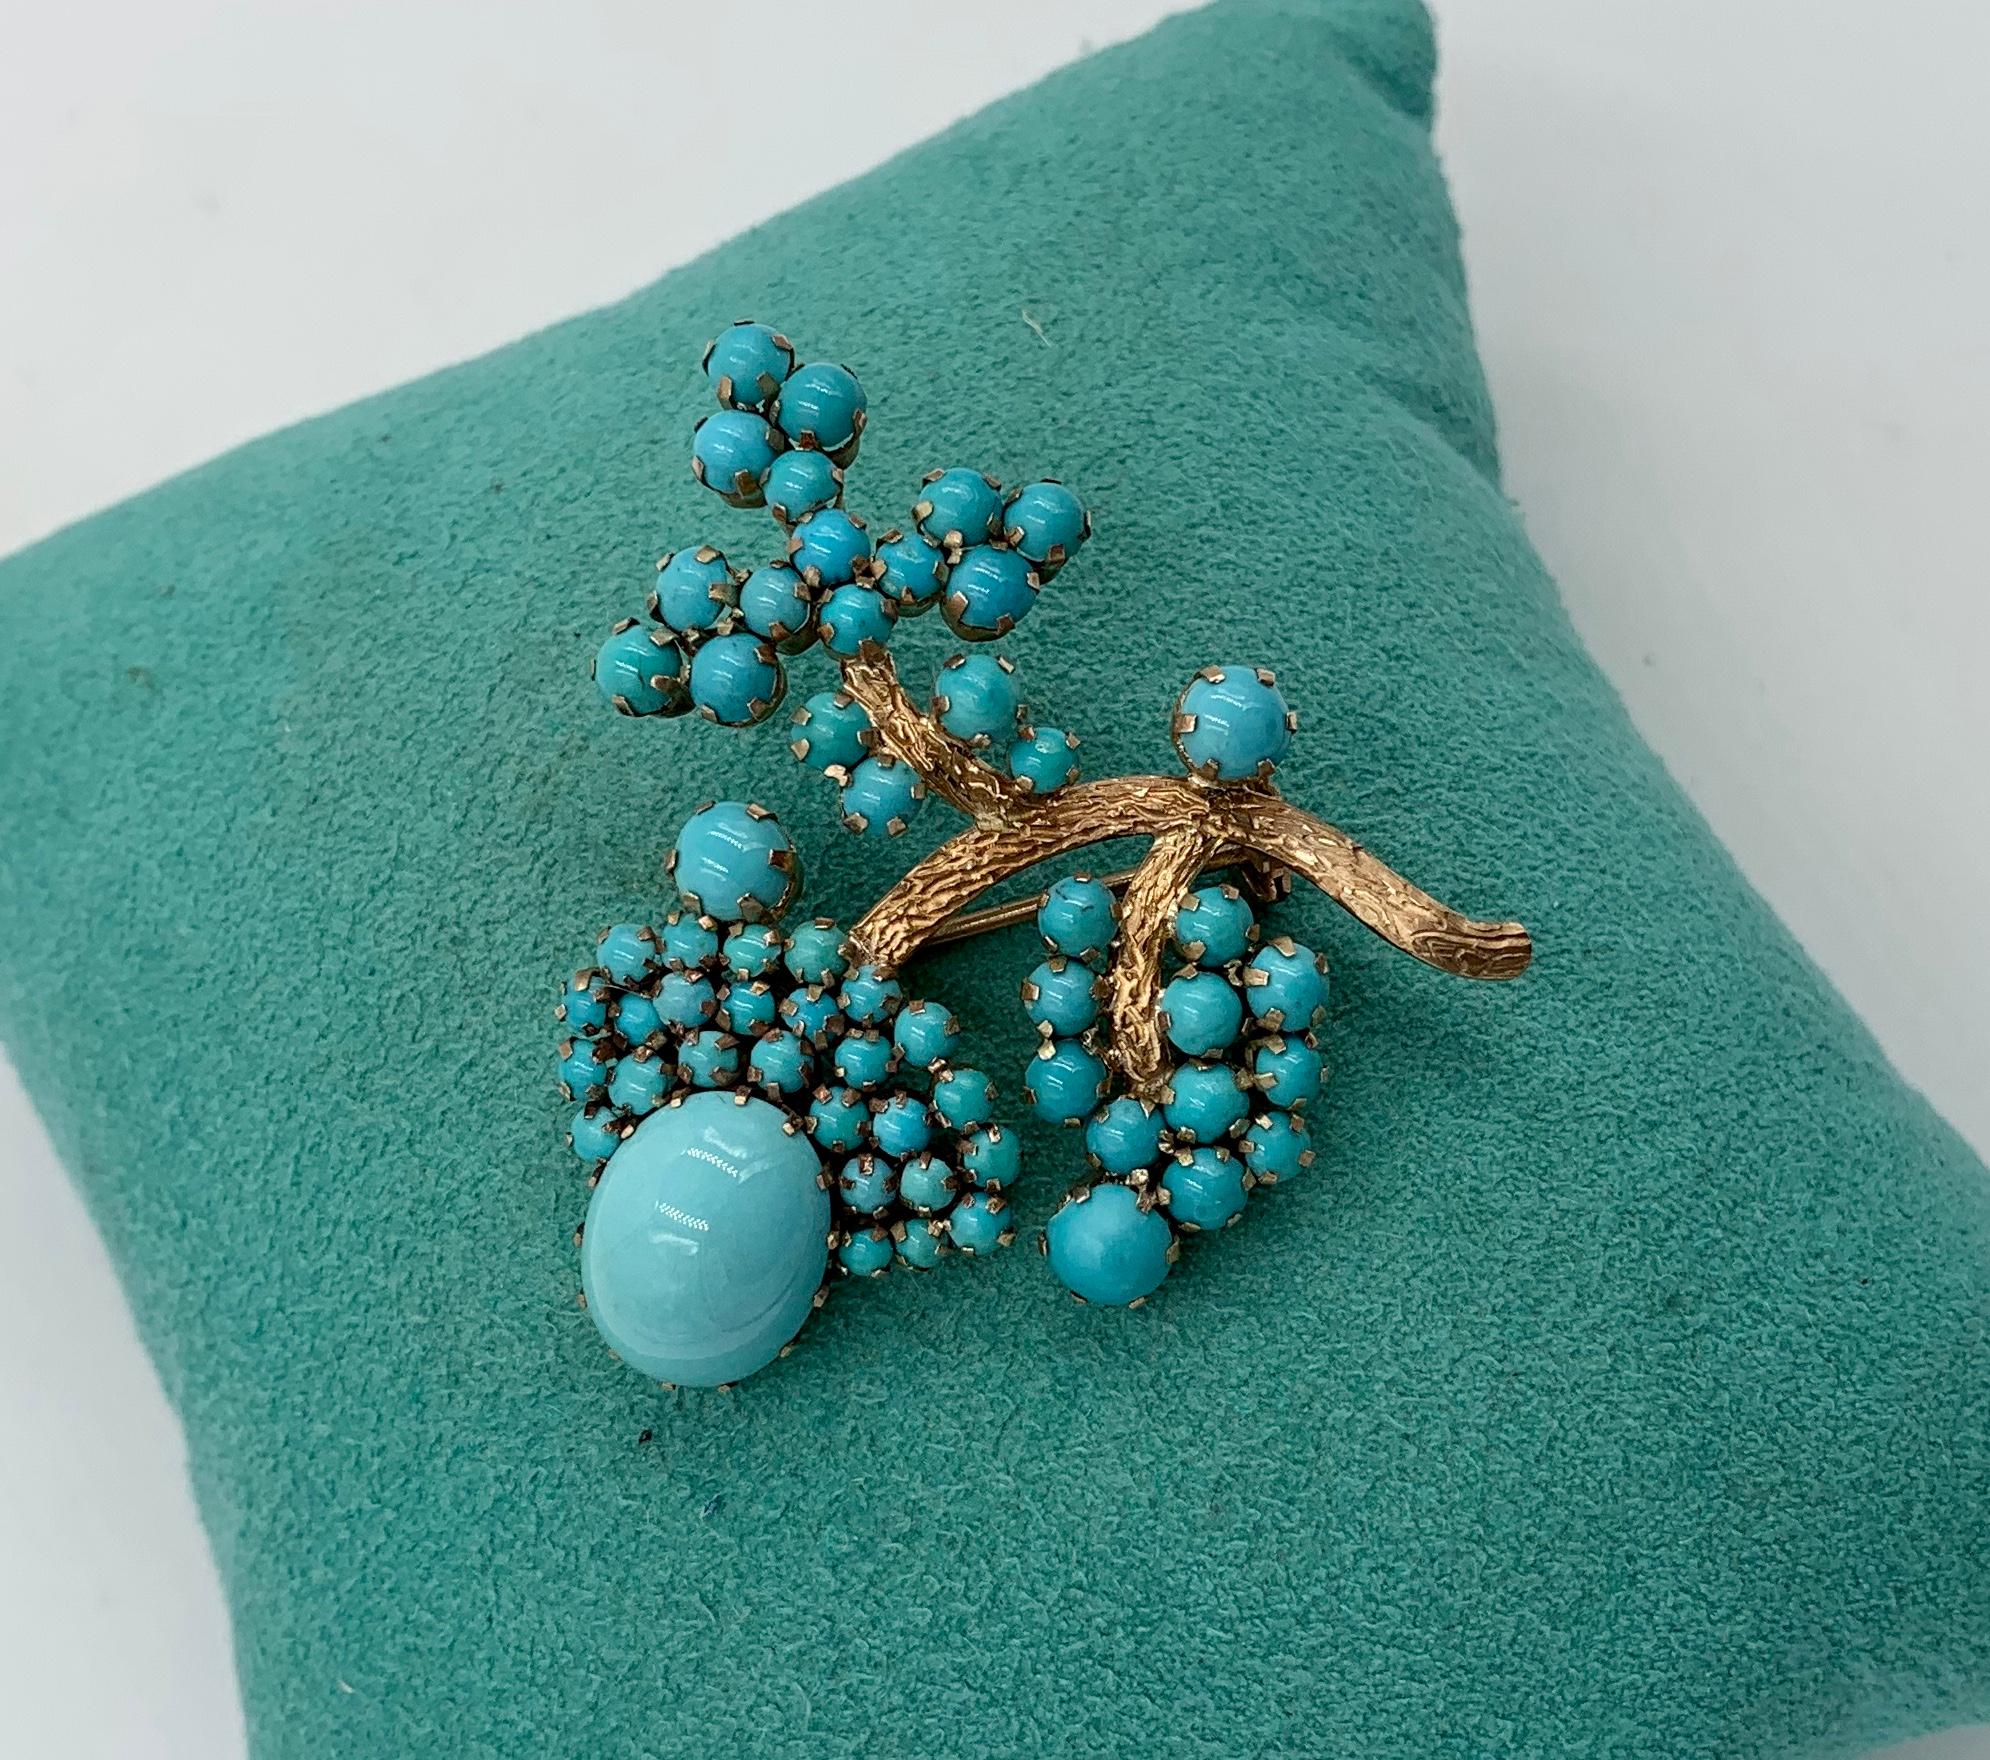 Cabochon Persian Turquoise Flower Brooch Pin Gold Retro Mid-Century Modern